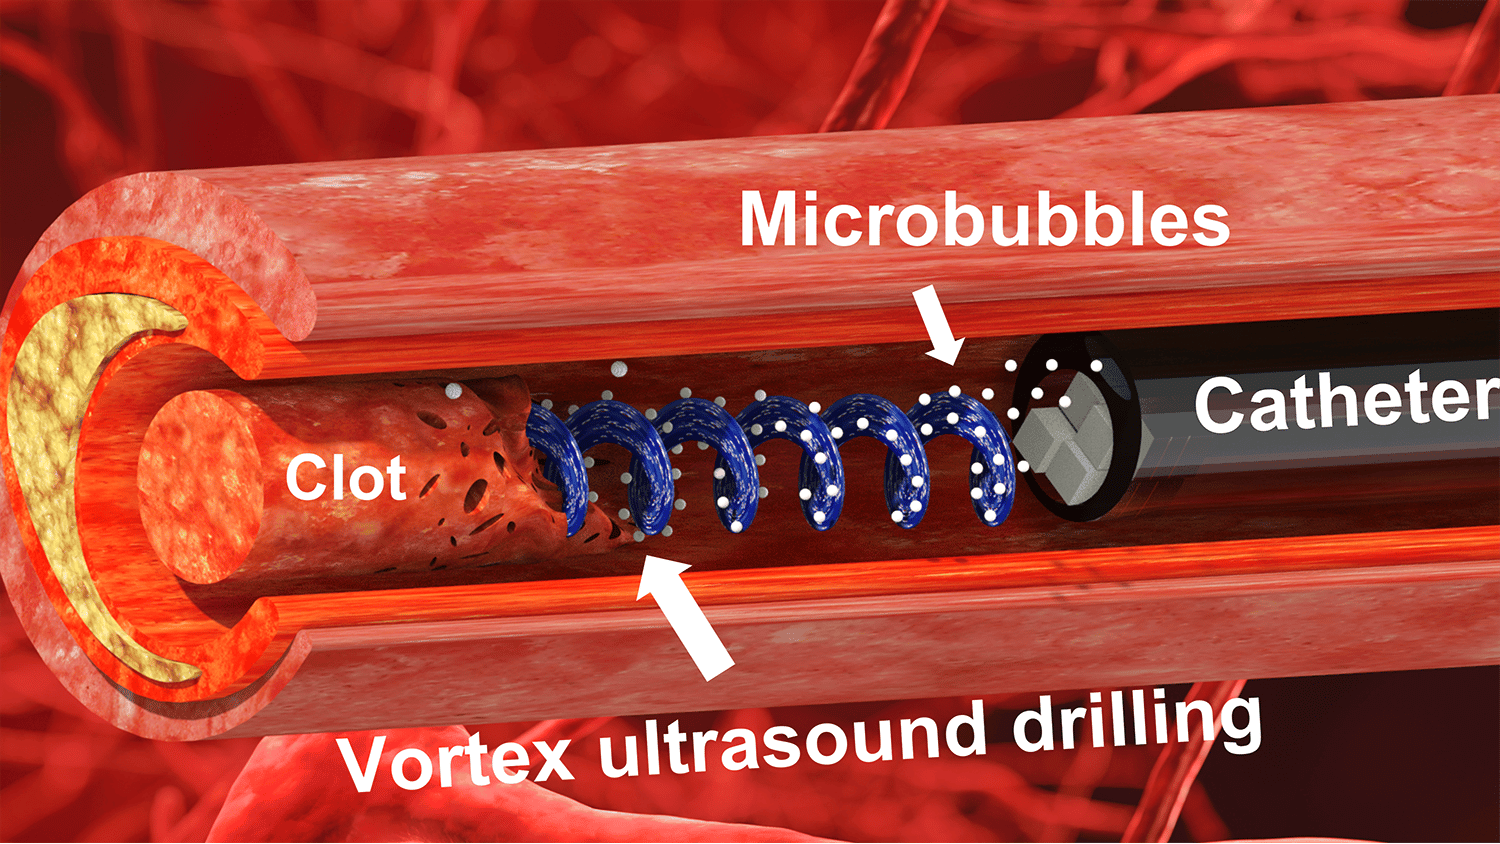 Illustration shows cross-section of a clogged blood vessel, with blue lines representing the vortex ultrasound clearing the clot.